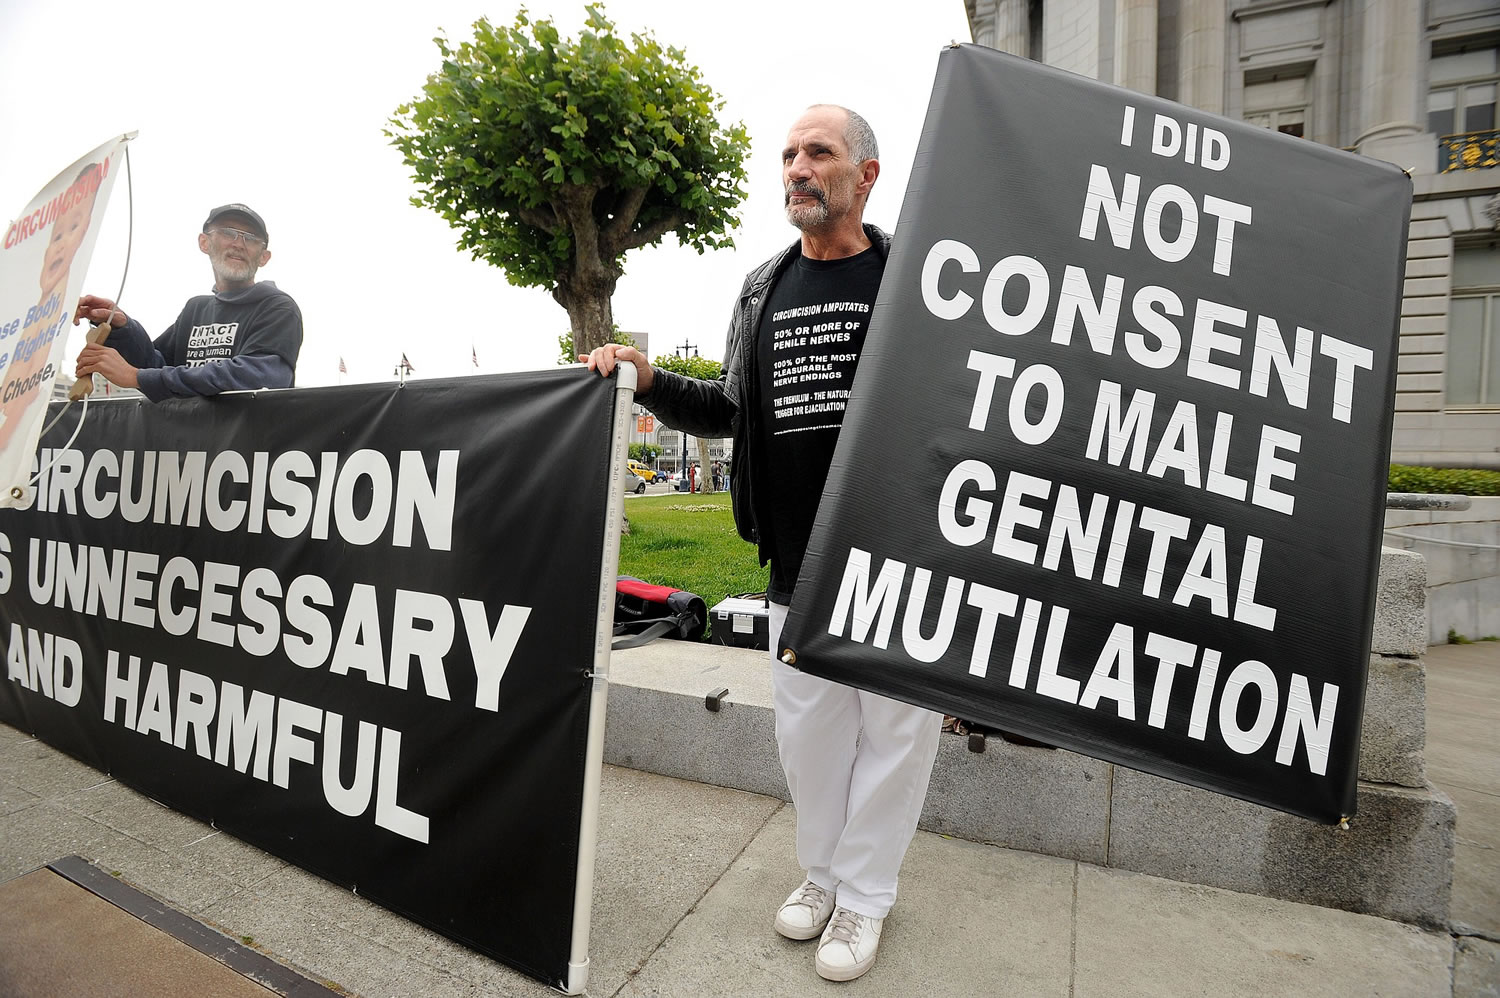 Anti-circumcision activists Frank McGinness, right, and Jeff Brown rally against circumcision with about 25 protesters outside a San Francisco courthouse in 2011.